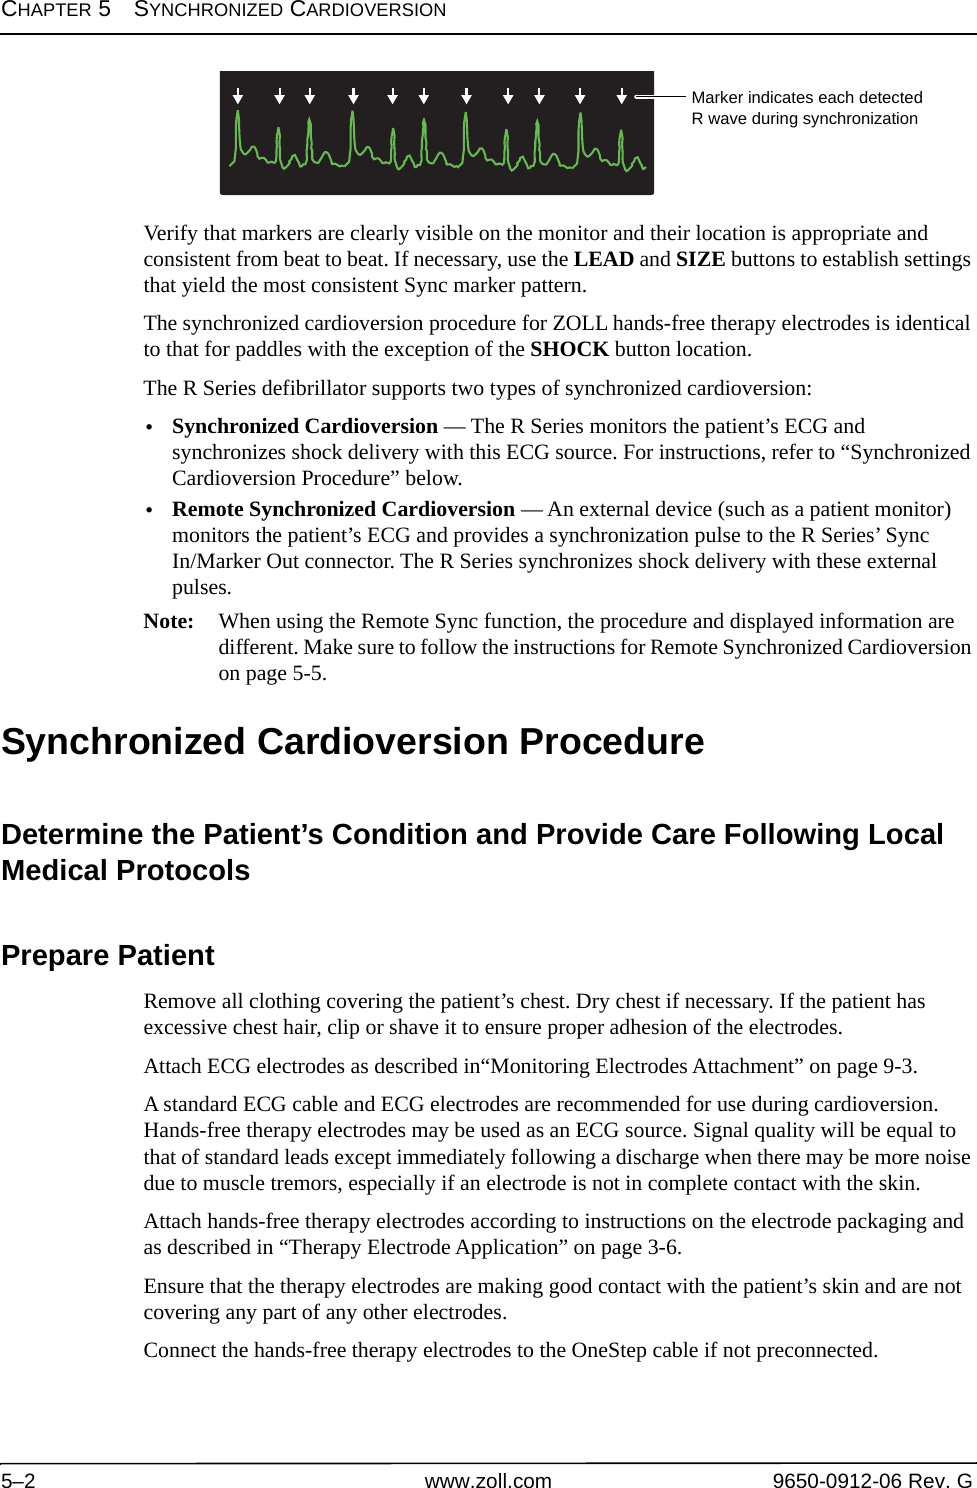 CHAPTER 5SYNCHRONIZED CARDIOVERSION5–2 www.zoll.com 9650-0912-06 Rev. GVerify that markers are clearly visible on the monitor and their location is appropriate and consistent from beat to beat. If necessary, use the LEAD and SIZE buttons to establish settings that yield the most consistent Sync marker pattern.The synchronized cardioversion procedure for ZOLL hands-free therapy electrodes is identical to that for paddles with the exception of the SHOCK button location.The R Series defibrillator supports two types of synchronized cardioversion:•Synchronized Cardioversion — The R Series monitors the patient’s ECG and synchronizes shock delivery with this ECG source. For instructions, refer to “Synchronized Cardioversion Procedure” below.•Remote Synchronized Cardioversion — An external device (such as a patient monitor) monitors the patient’s ECG and provides a synchronization pulse to the R Series’ Sync In/Marker Out connector. The R Series synchronizes shock delivery with these external pulses.Note: When using the Remote Sync function, the procedure and displayed information are different. Make sure to follow the instructions for Remote Synchronized Cardioversion on page 5-5.Synchronized Cardioversion ProcedureDetermine the Patient’s Condition and Provide Care Following Local Medical ProtocolsPrepare PatientRemove all clothing covering the patient’s chest. Dry chest if necessary. If the patient has excessive chest hair, clip or shave it to ensure proper adhesion of the electrodes.Attach ECG electrodes as described in“Monitoring Electrodes Attachment” on page 9-3.A standard ECG cable and ECG electrodes are recommended for use during cardioversion. Hands-free therapy electrodes may be used as an ECG source. Signal quality will be equal to that of standard leads except immediately following a discharge when there may be more noise due to muscle tremors, especially if an electrode is not in complete contact with the skin. Attach hands-free therapy electrodes according to instructions on the electrode packaging and as described in “Therapy Electrode Application” on page 3-6.Ensure that the therapy electrodes are making good contact with the patient’s skin and are not covering any part of any other electrodes.Connect the hands-free therapy electrodes to the OneStep cable if not preconnected.Marker indicates each detected R wave during synchronization